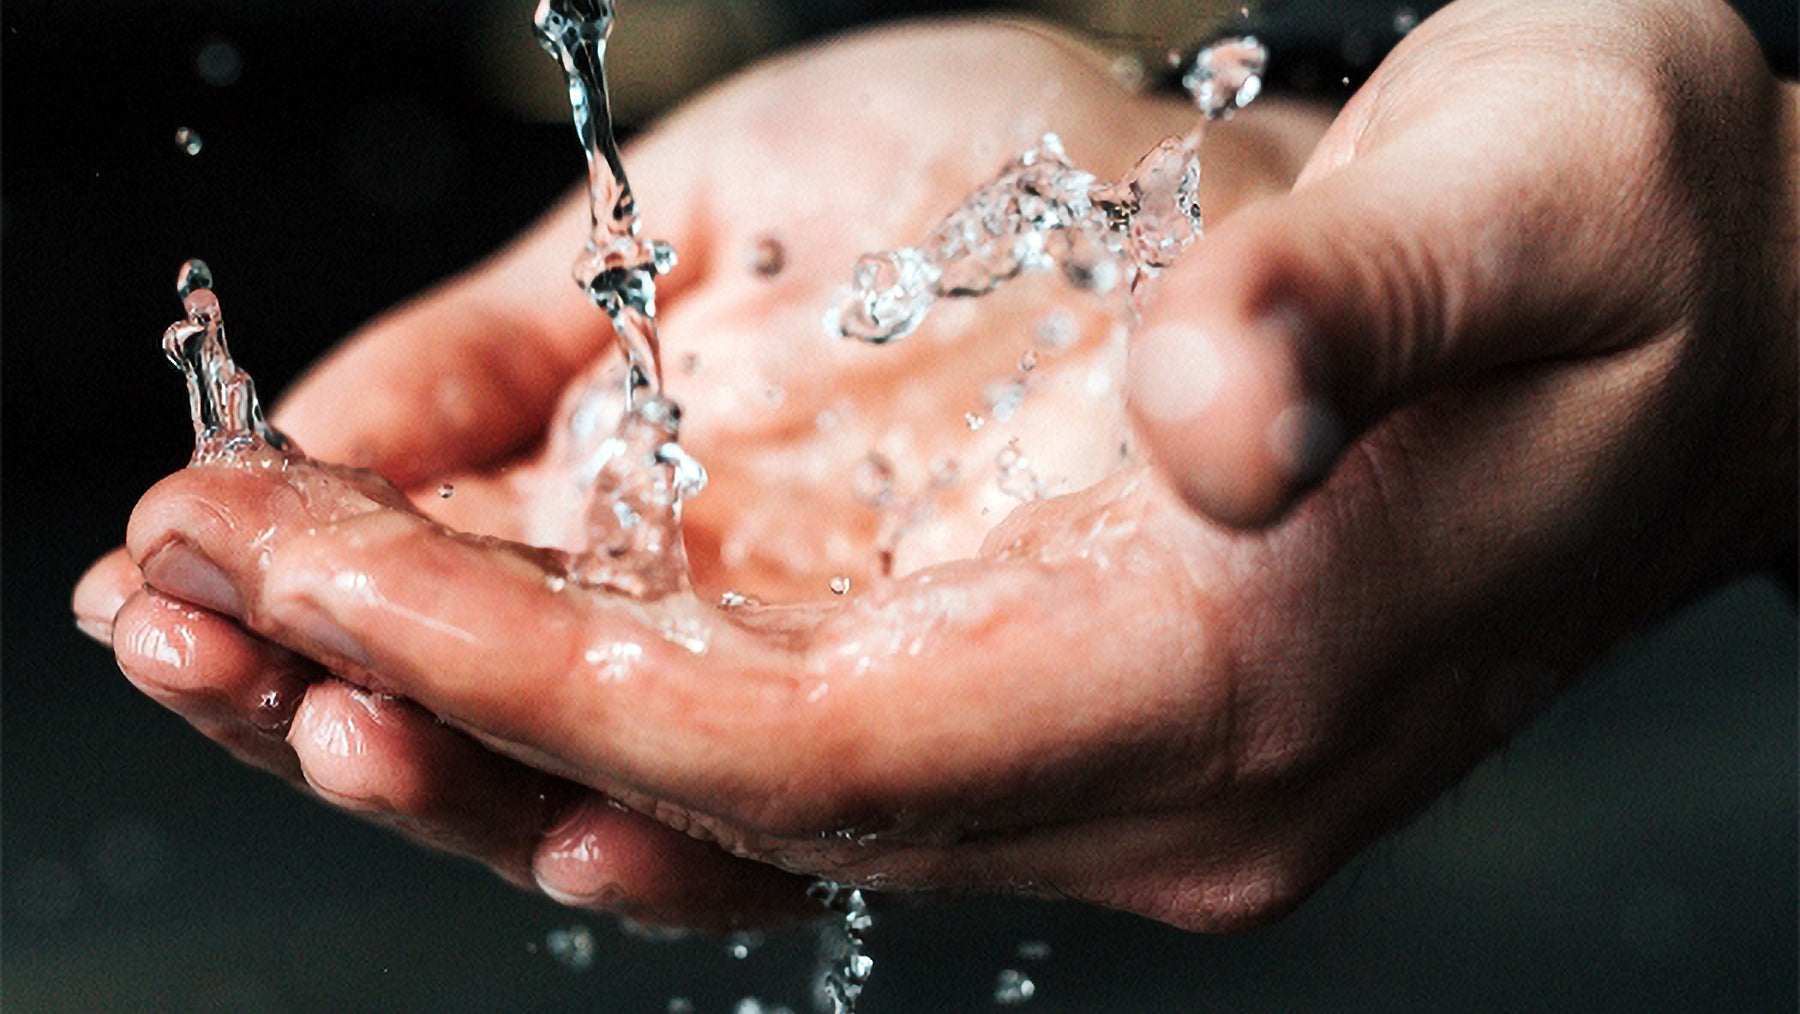 Why hand washing and hand sanitizing are both so important